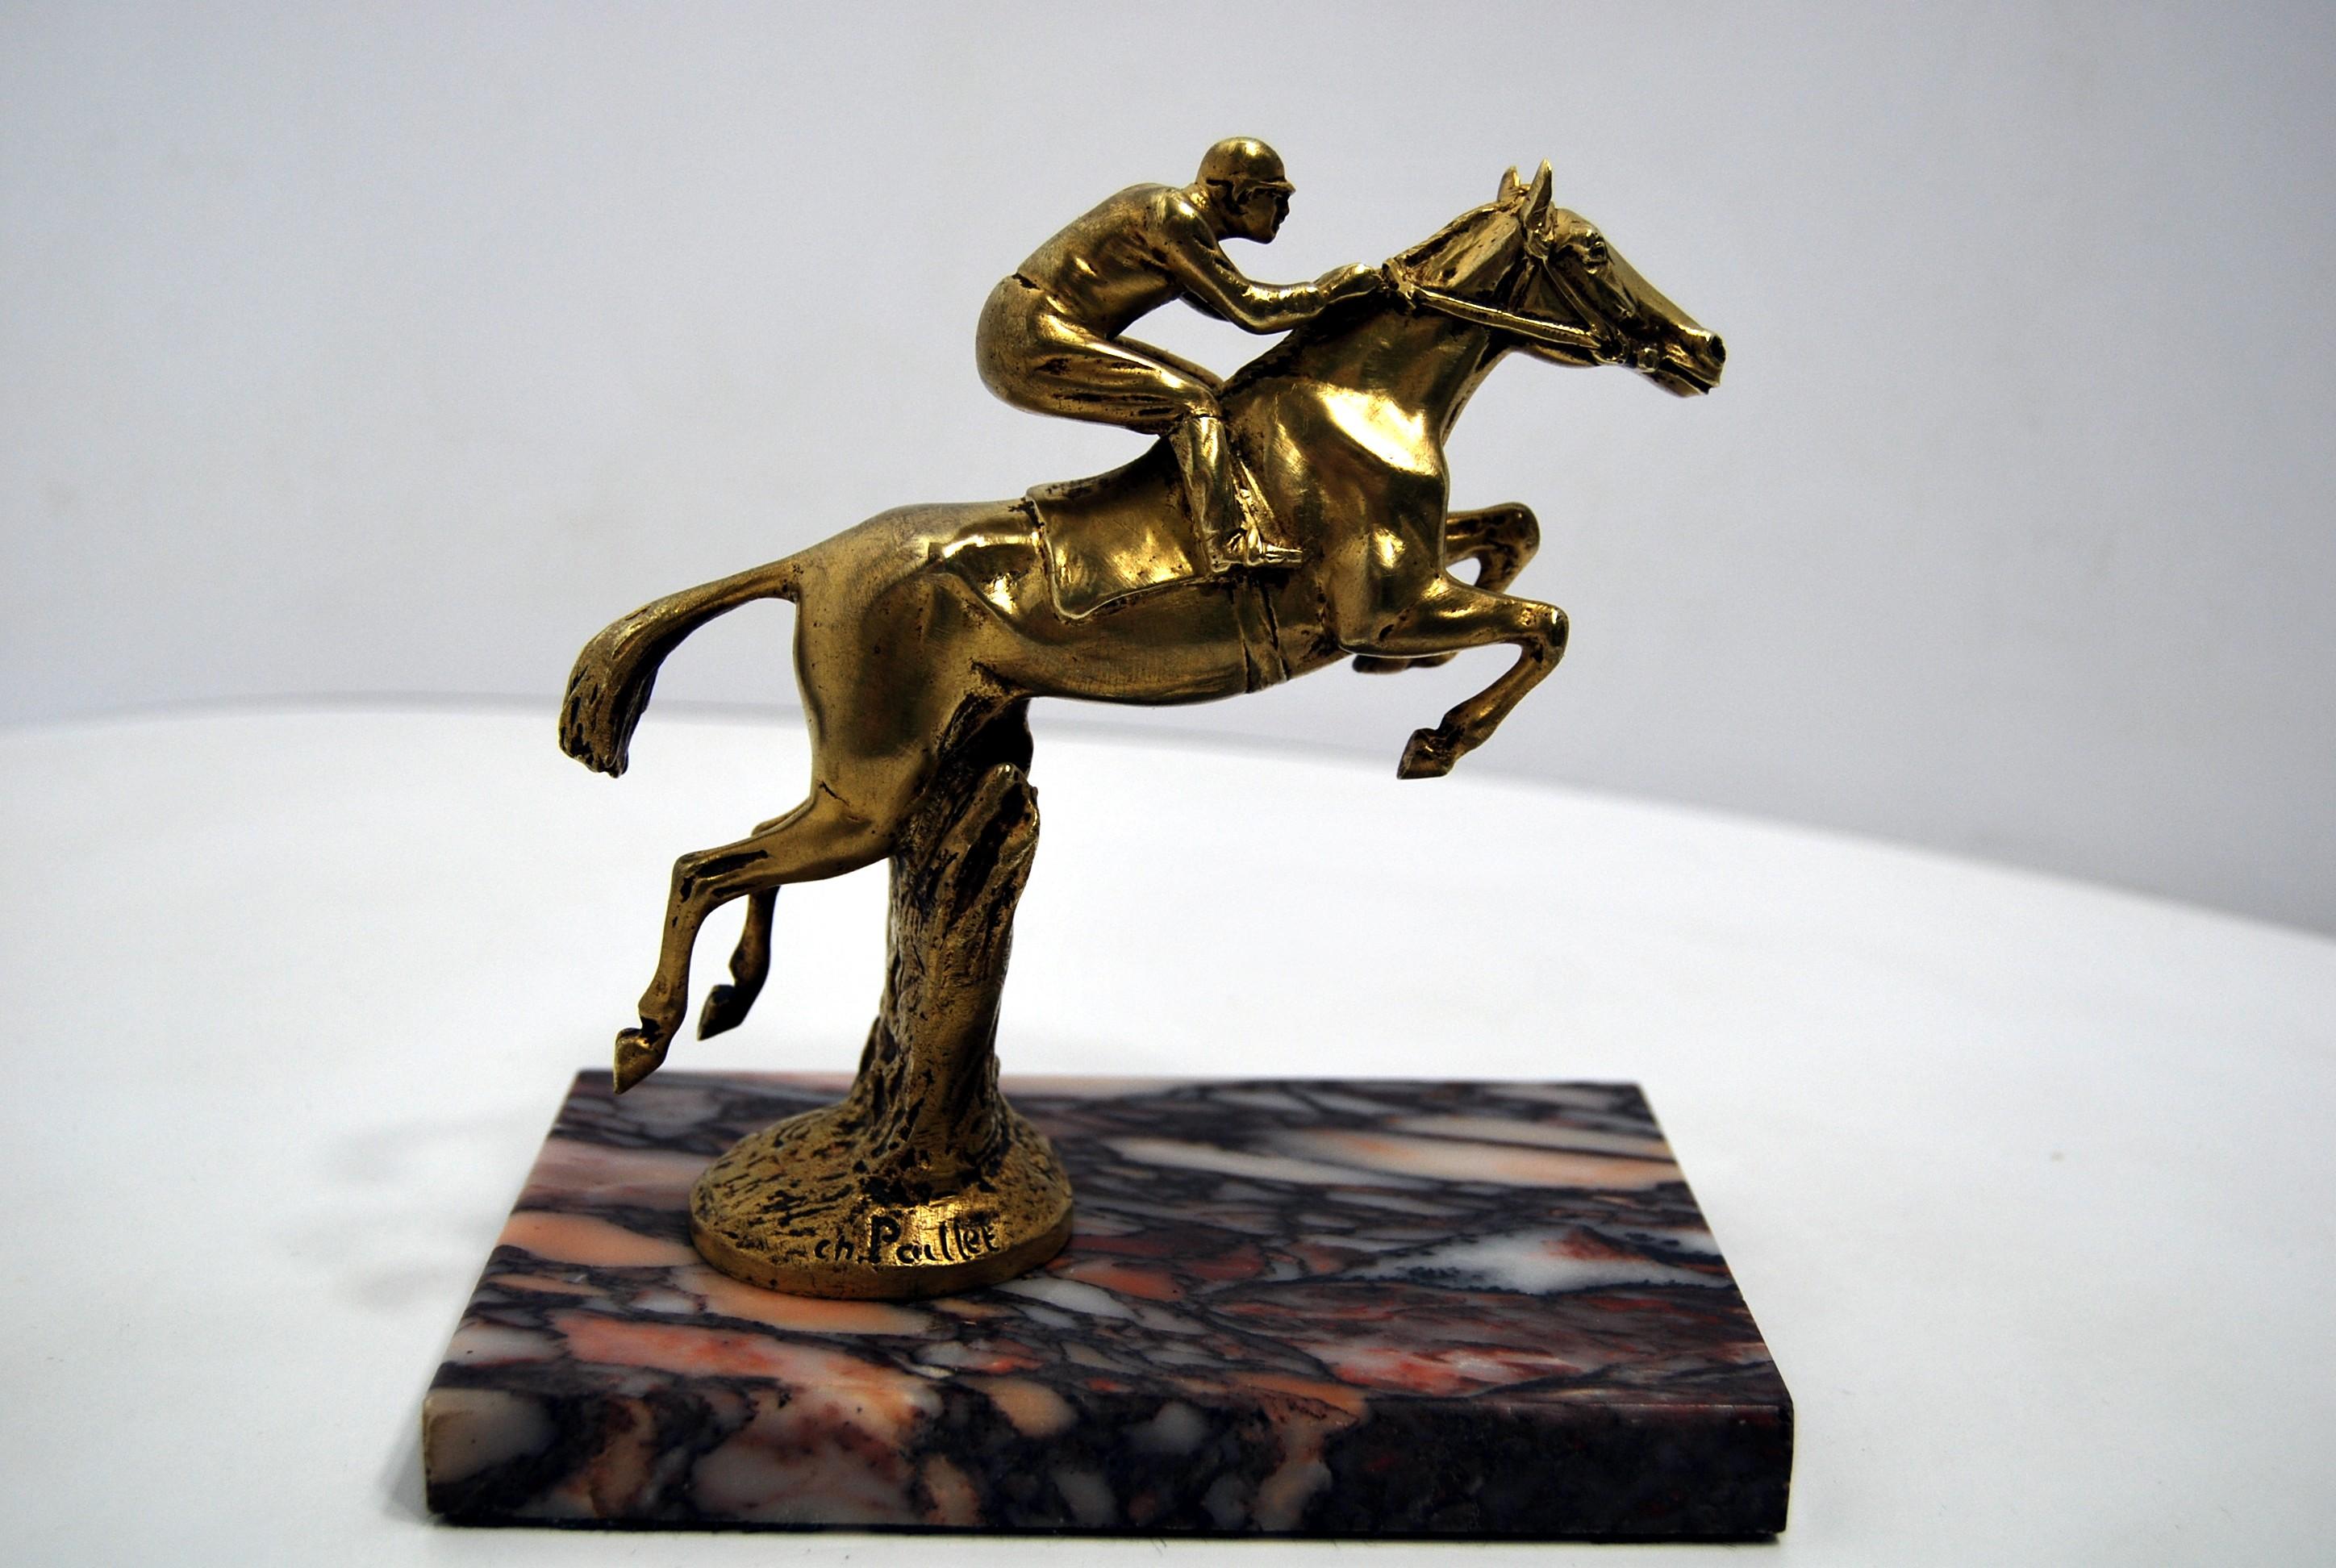 Beautiful small bronze statuette with ormoulu finish from the early 20th century, around 1920, on a breccia marble base. Untitled a rare representation of steeplechase with a jockey and his horse jumping a hurdle.

This satuette is signed at the